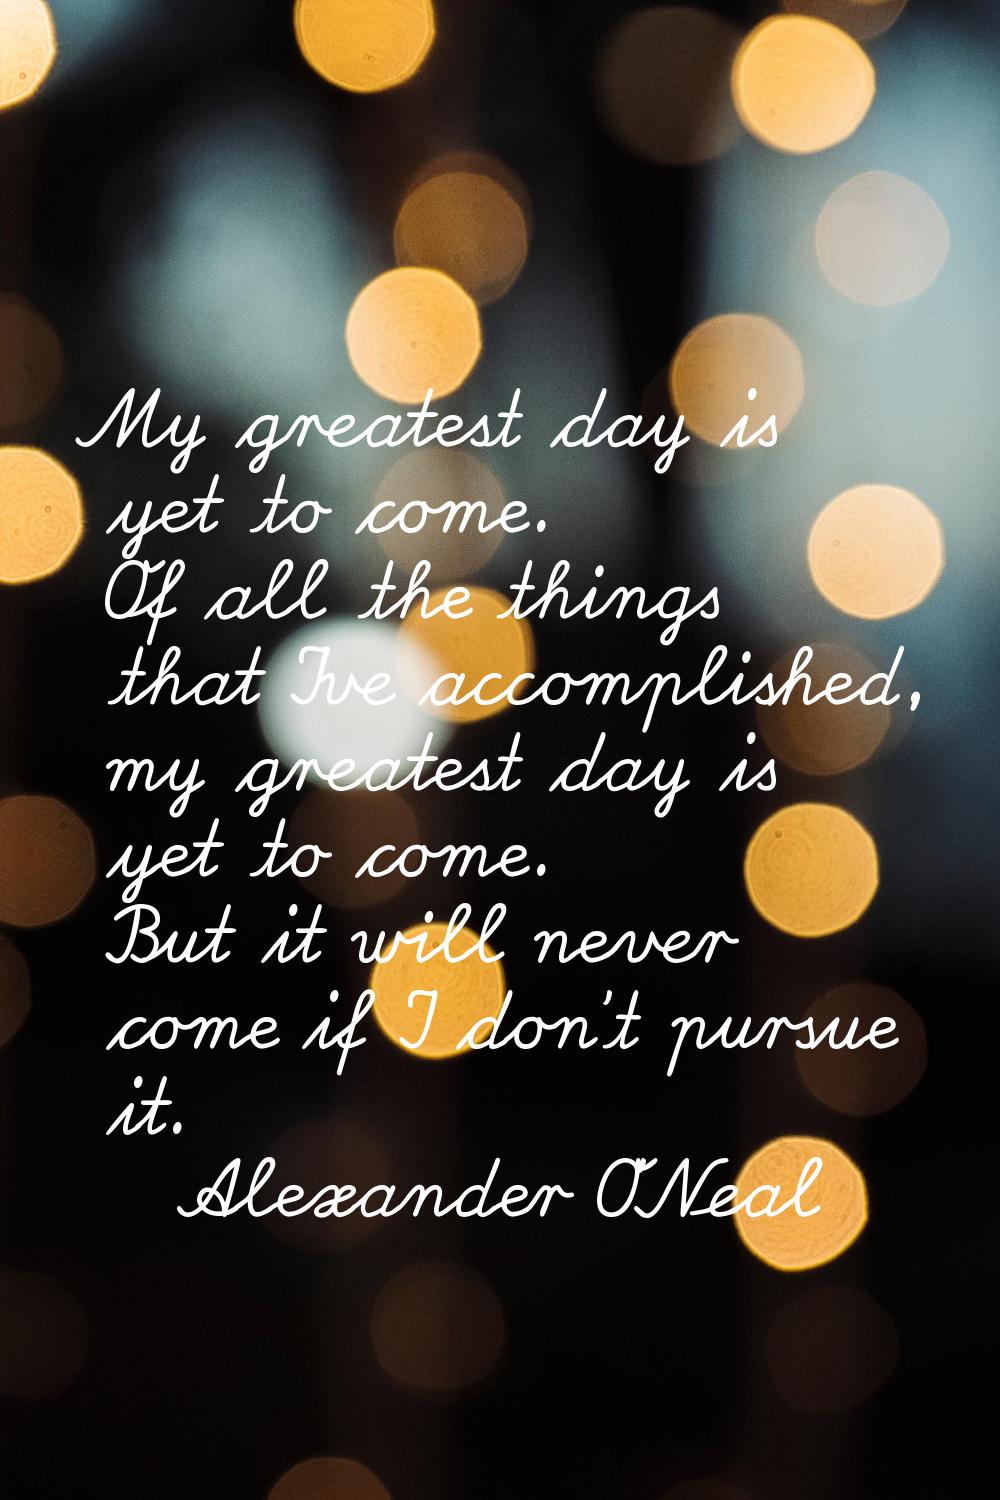 My greatest day is yet to come. Of all the things that I've accomplished, my greatest day is yet to